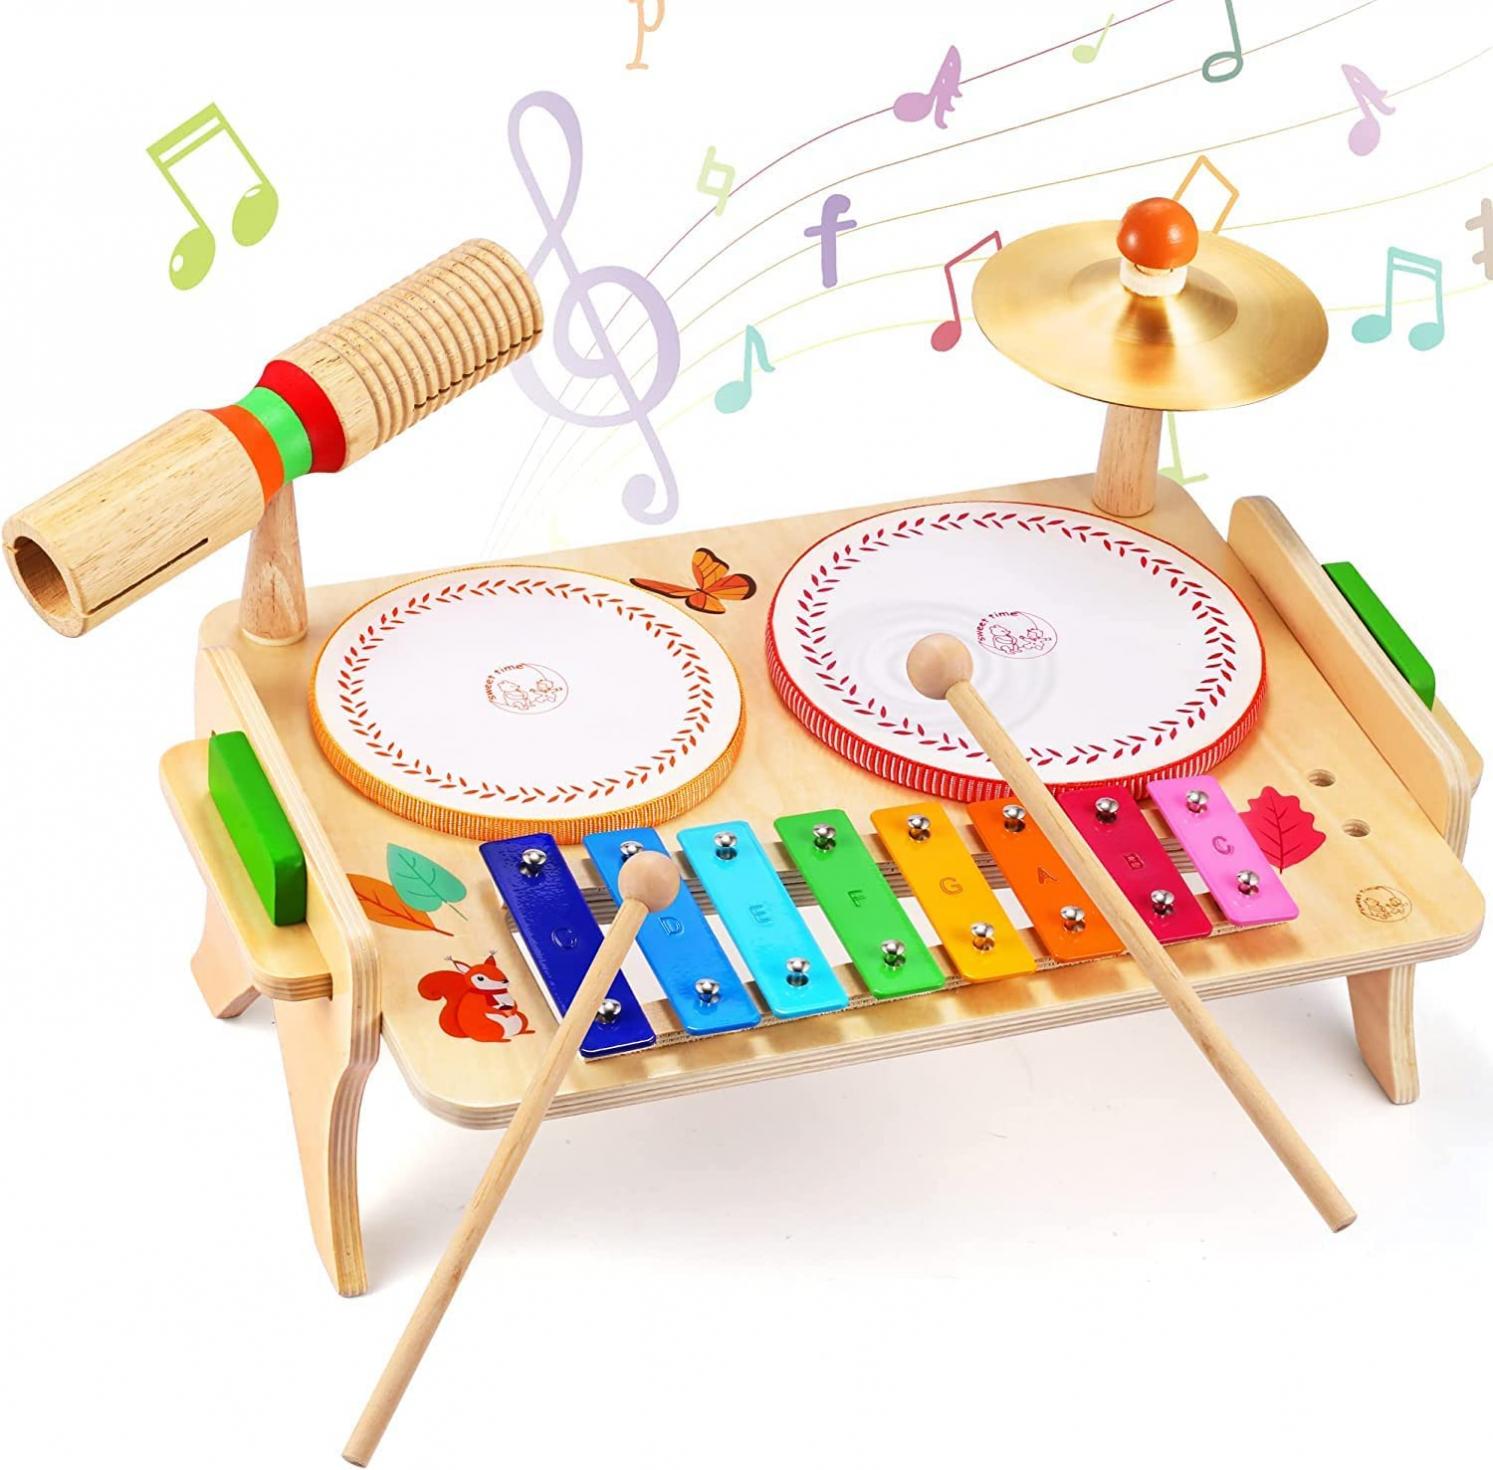 Wingz Kids Drum Set for Toddlers Baby Music Instrunents 7 in 1Montessori Preschool Musical Toys Children Drum kit Xylophone Tambourine Birthday Gifts for Boys and Girls